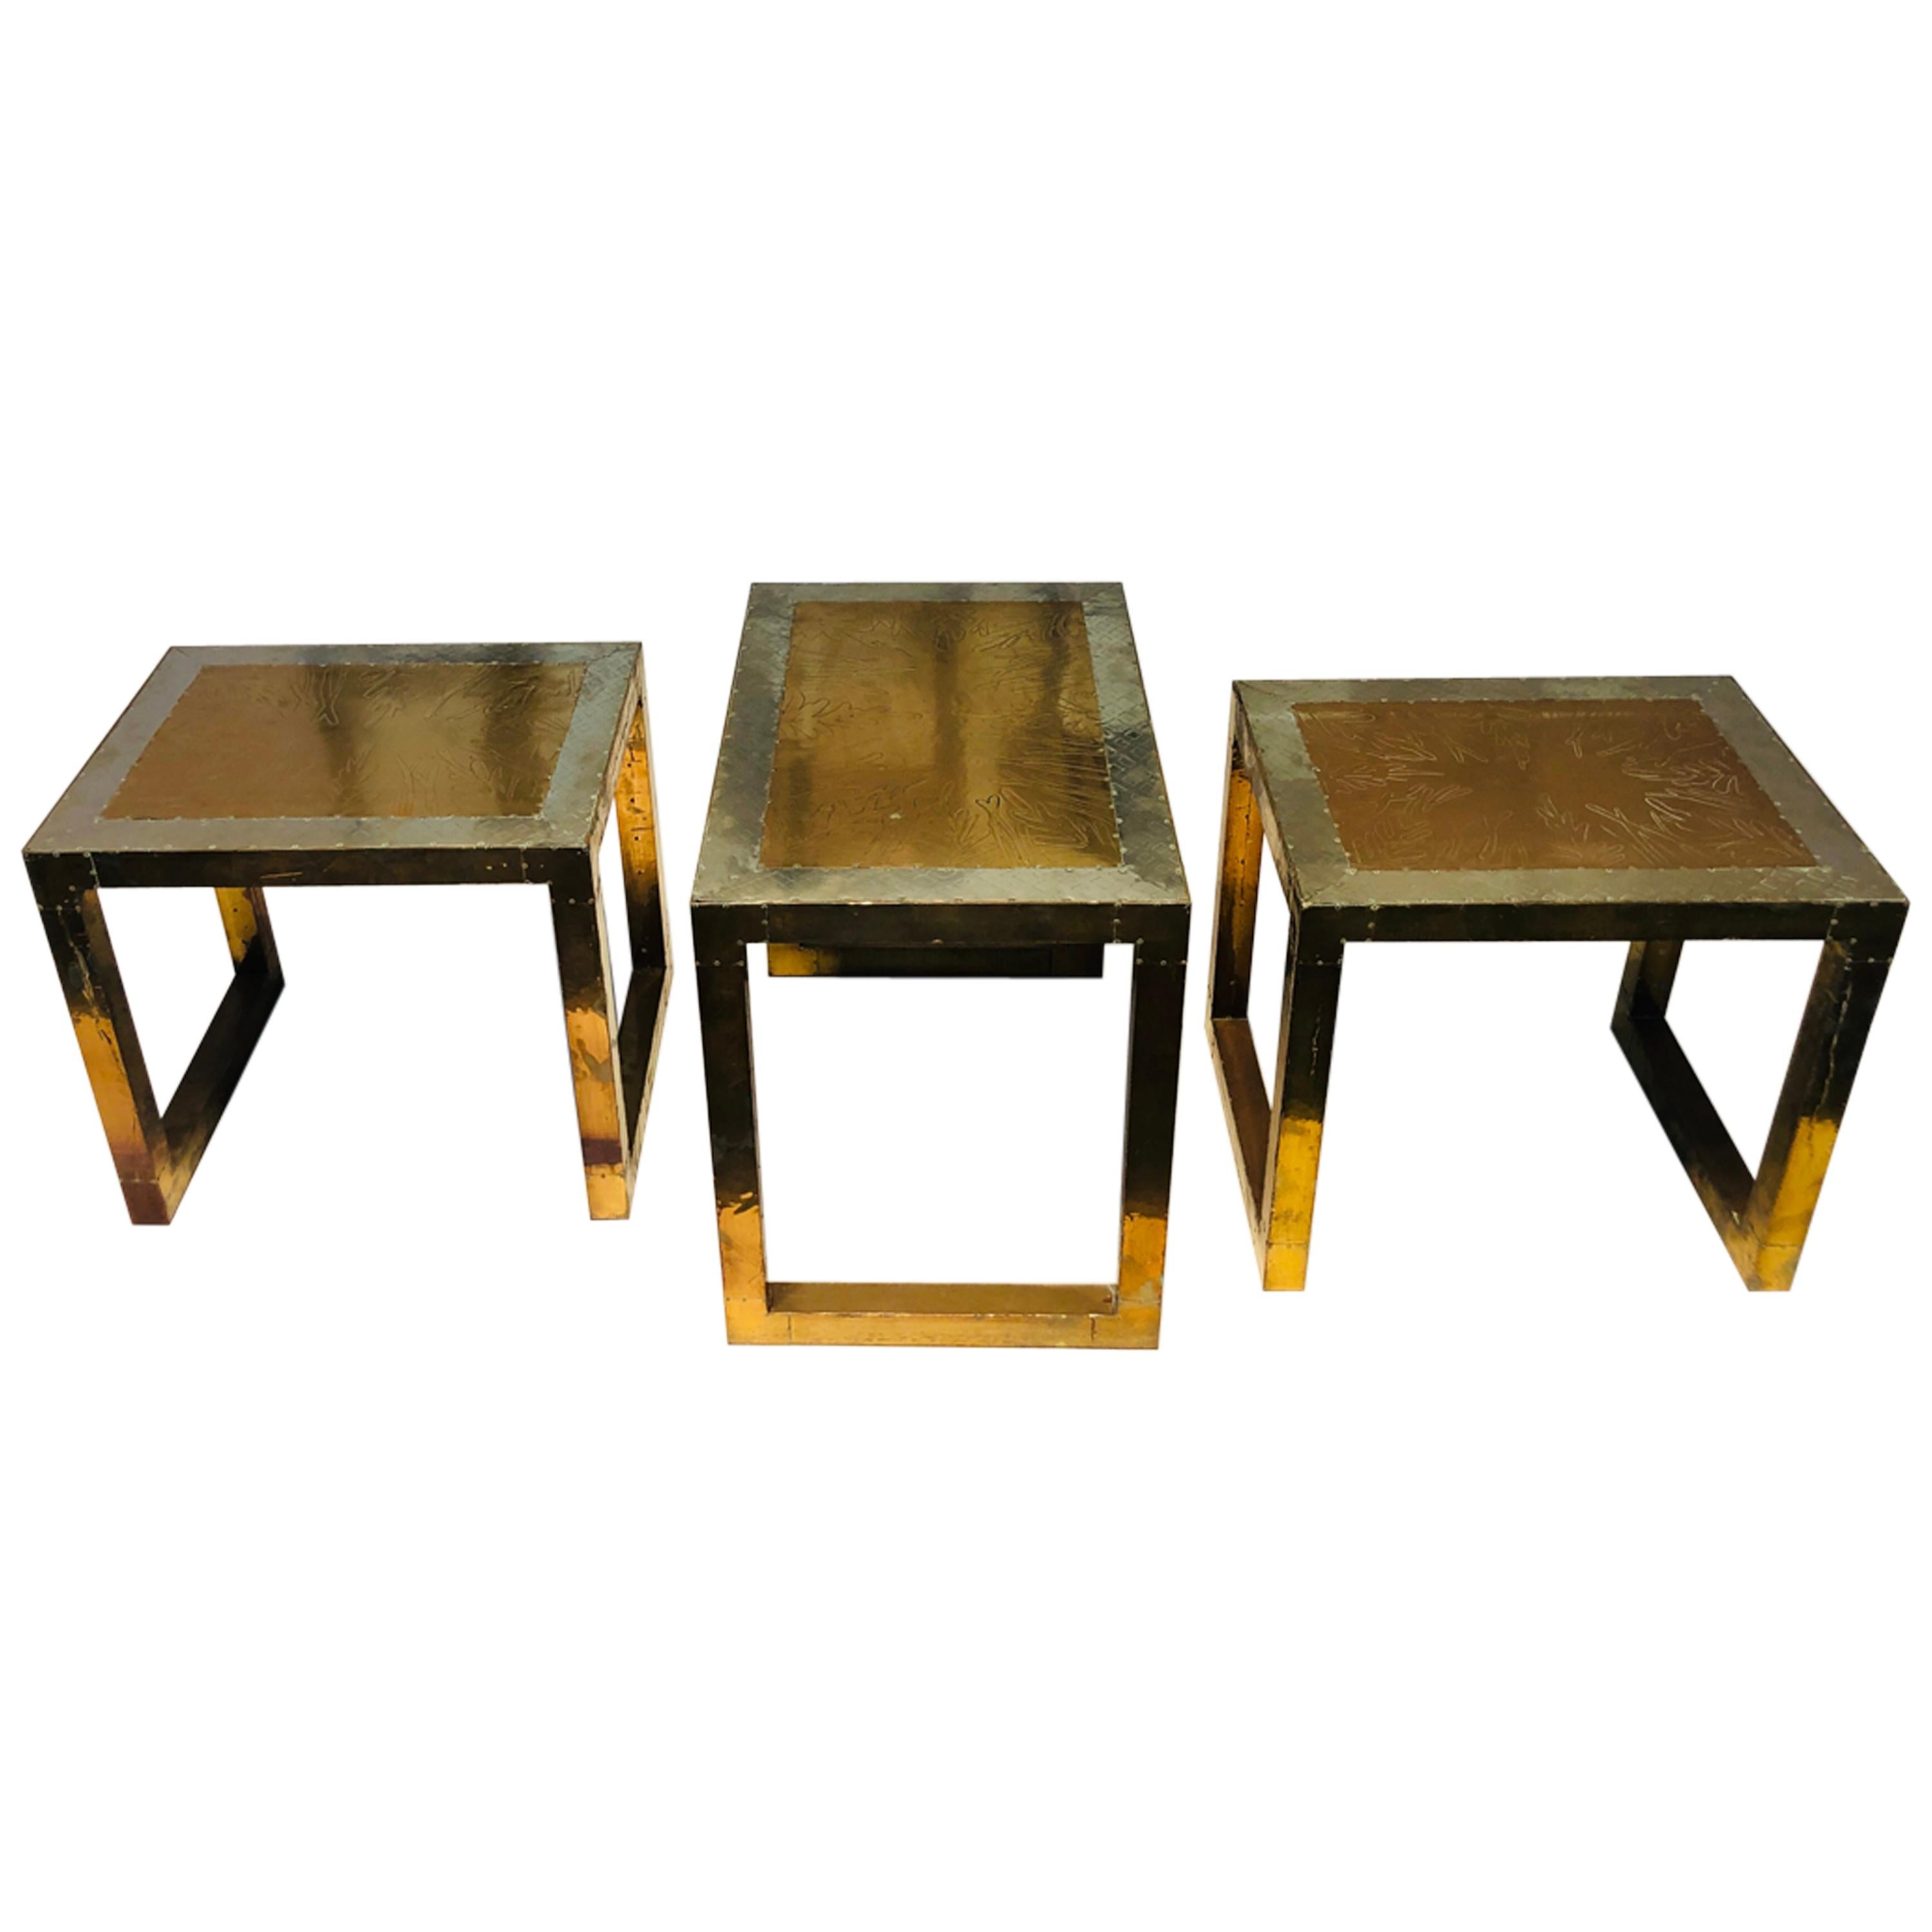 Vintage Spanish Set of Three Golden Metal Sofa Tables Signed by Rudolfo Dubarry